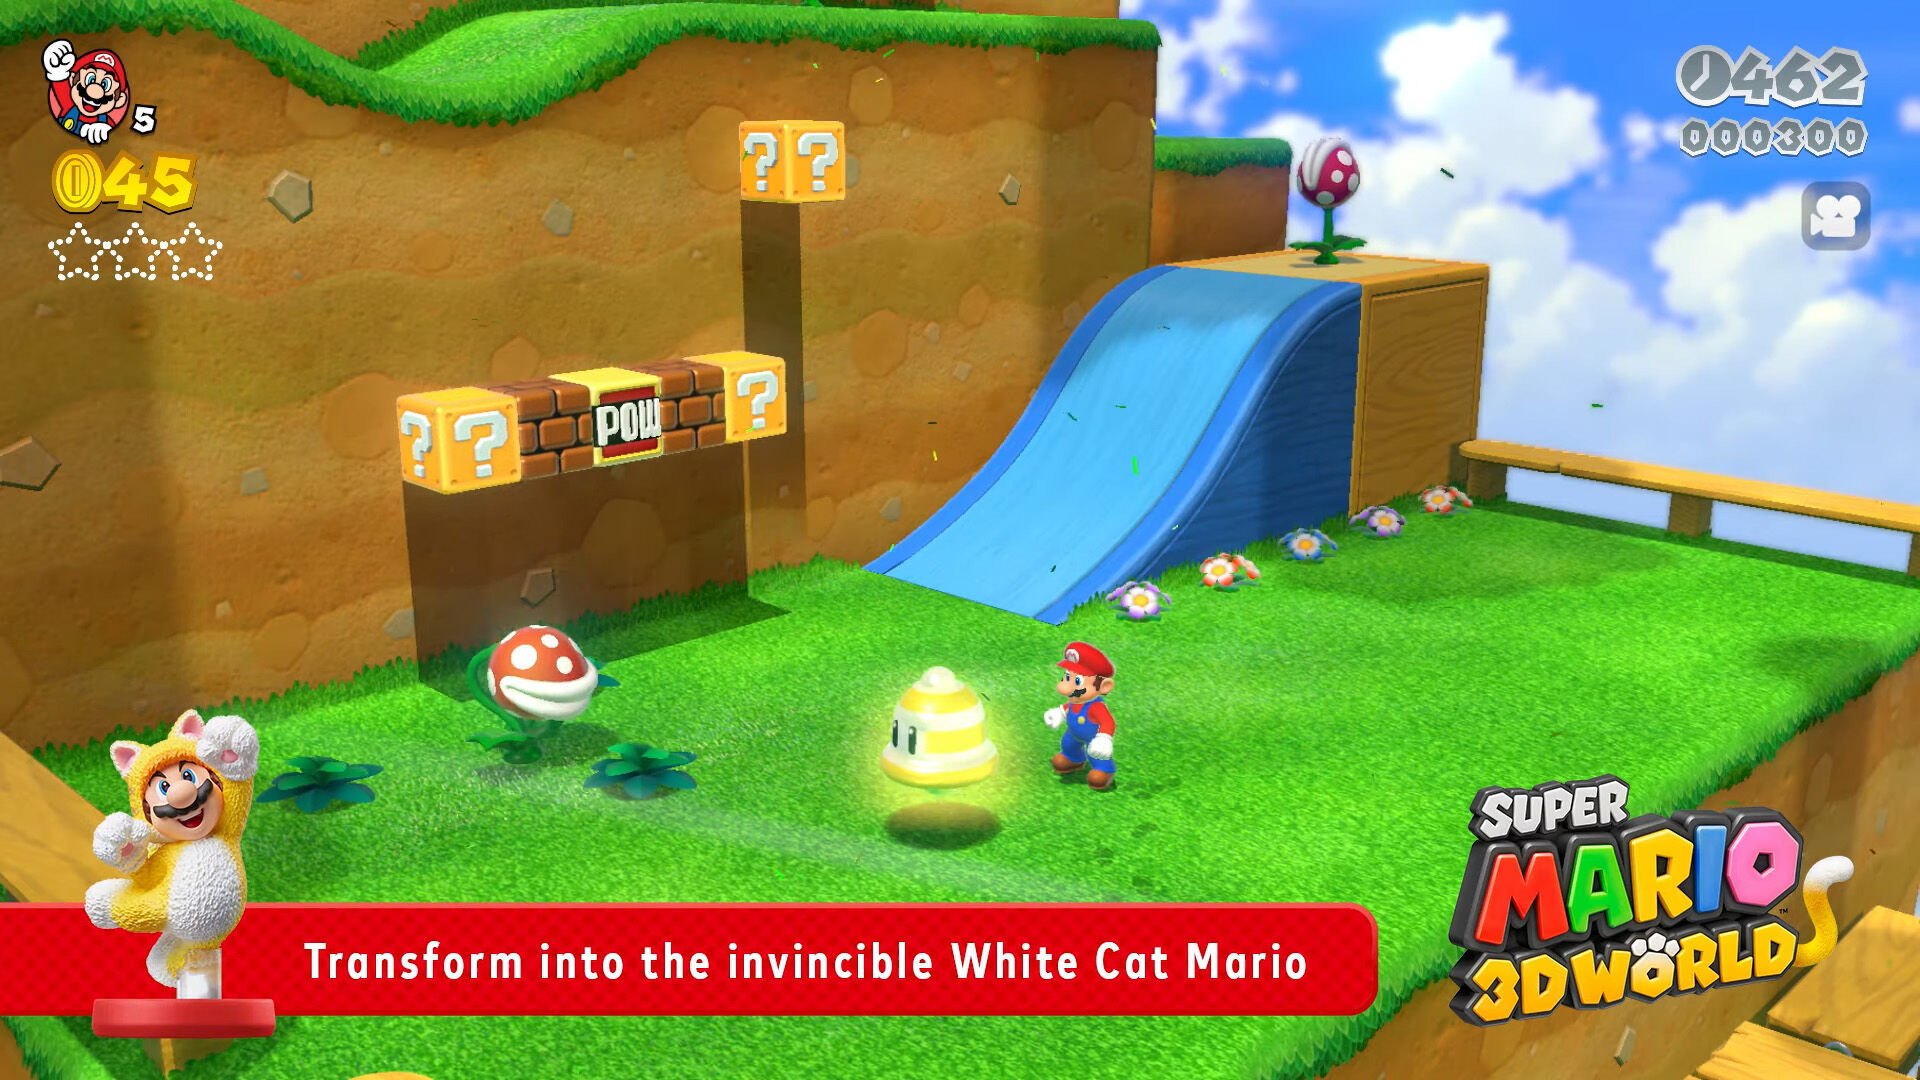 How to Use Amiibo in Super Mario 3D World + Bowser's Fury